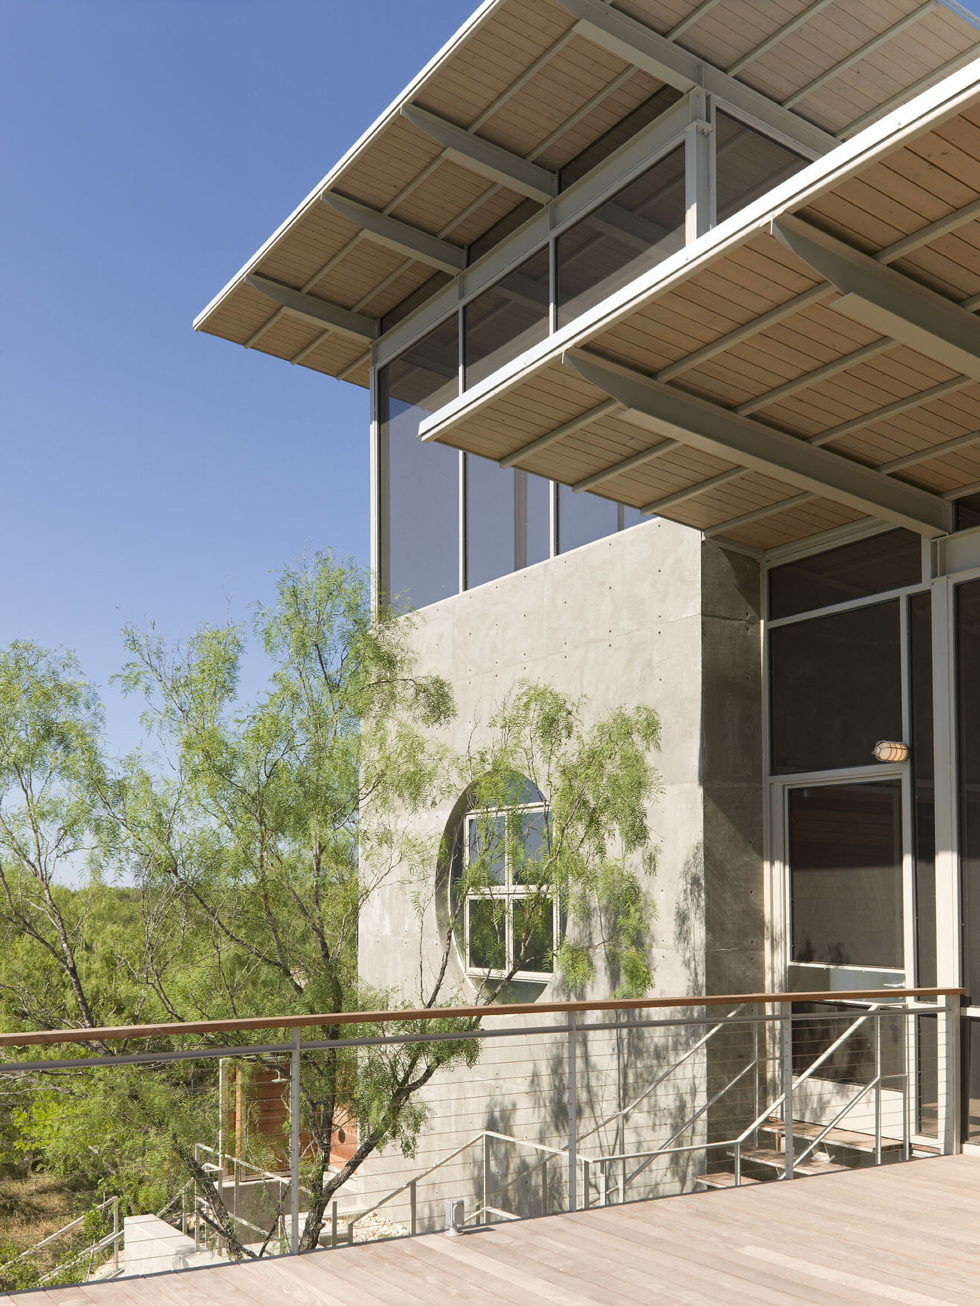 The House Made Of Aluminum Trailer In Texas From Andrew Hinman Architecture 7